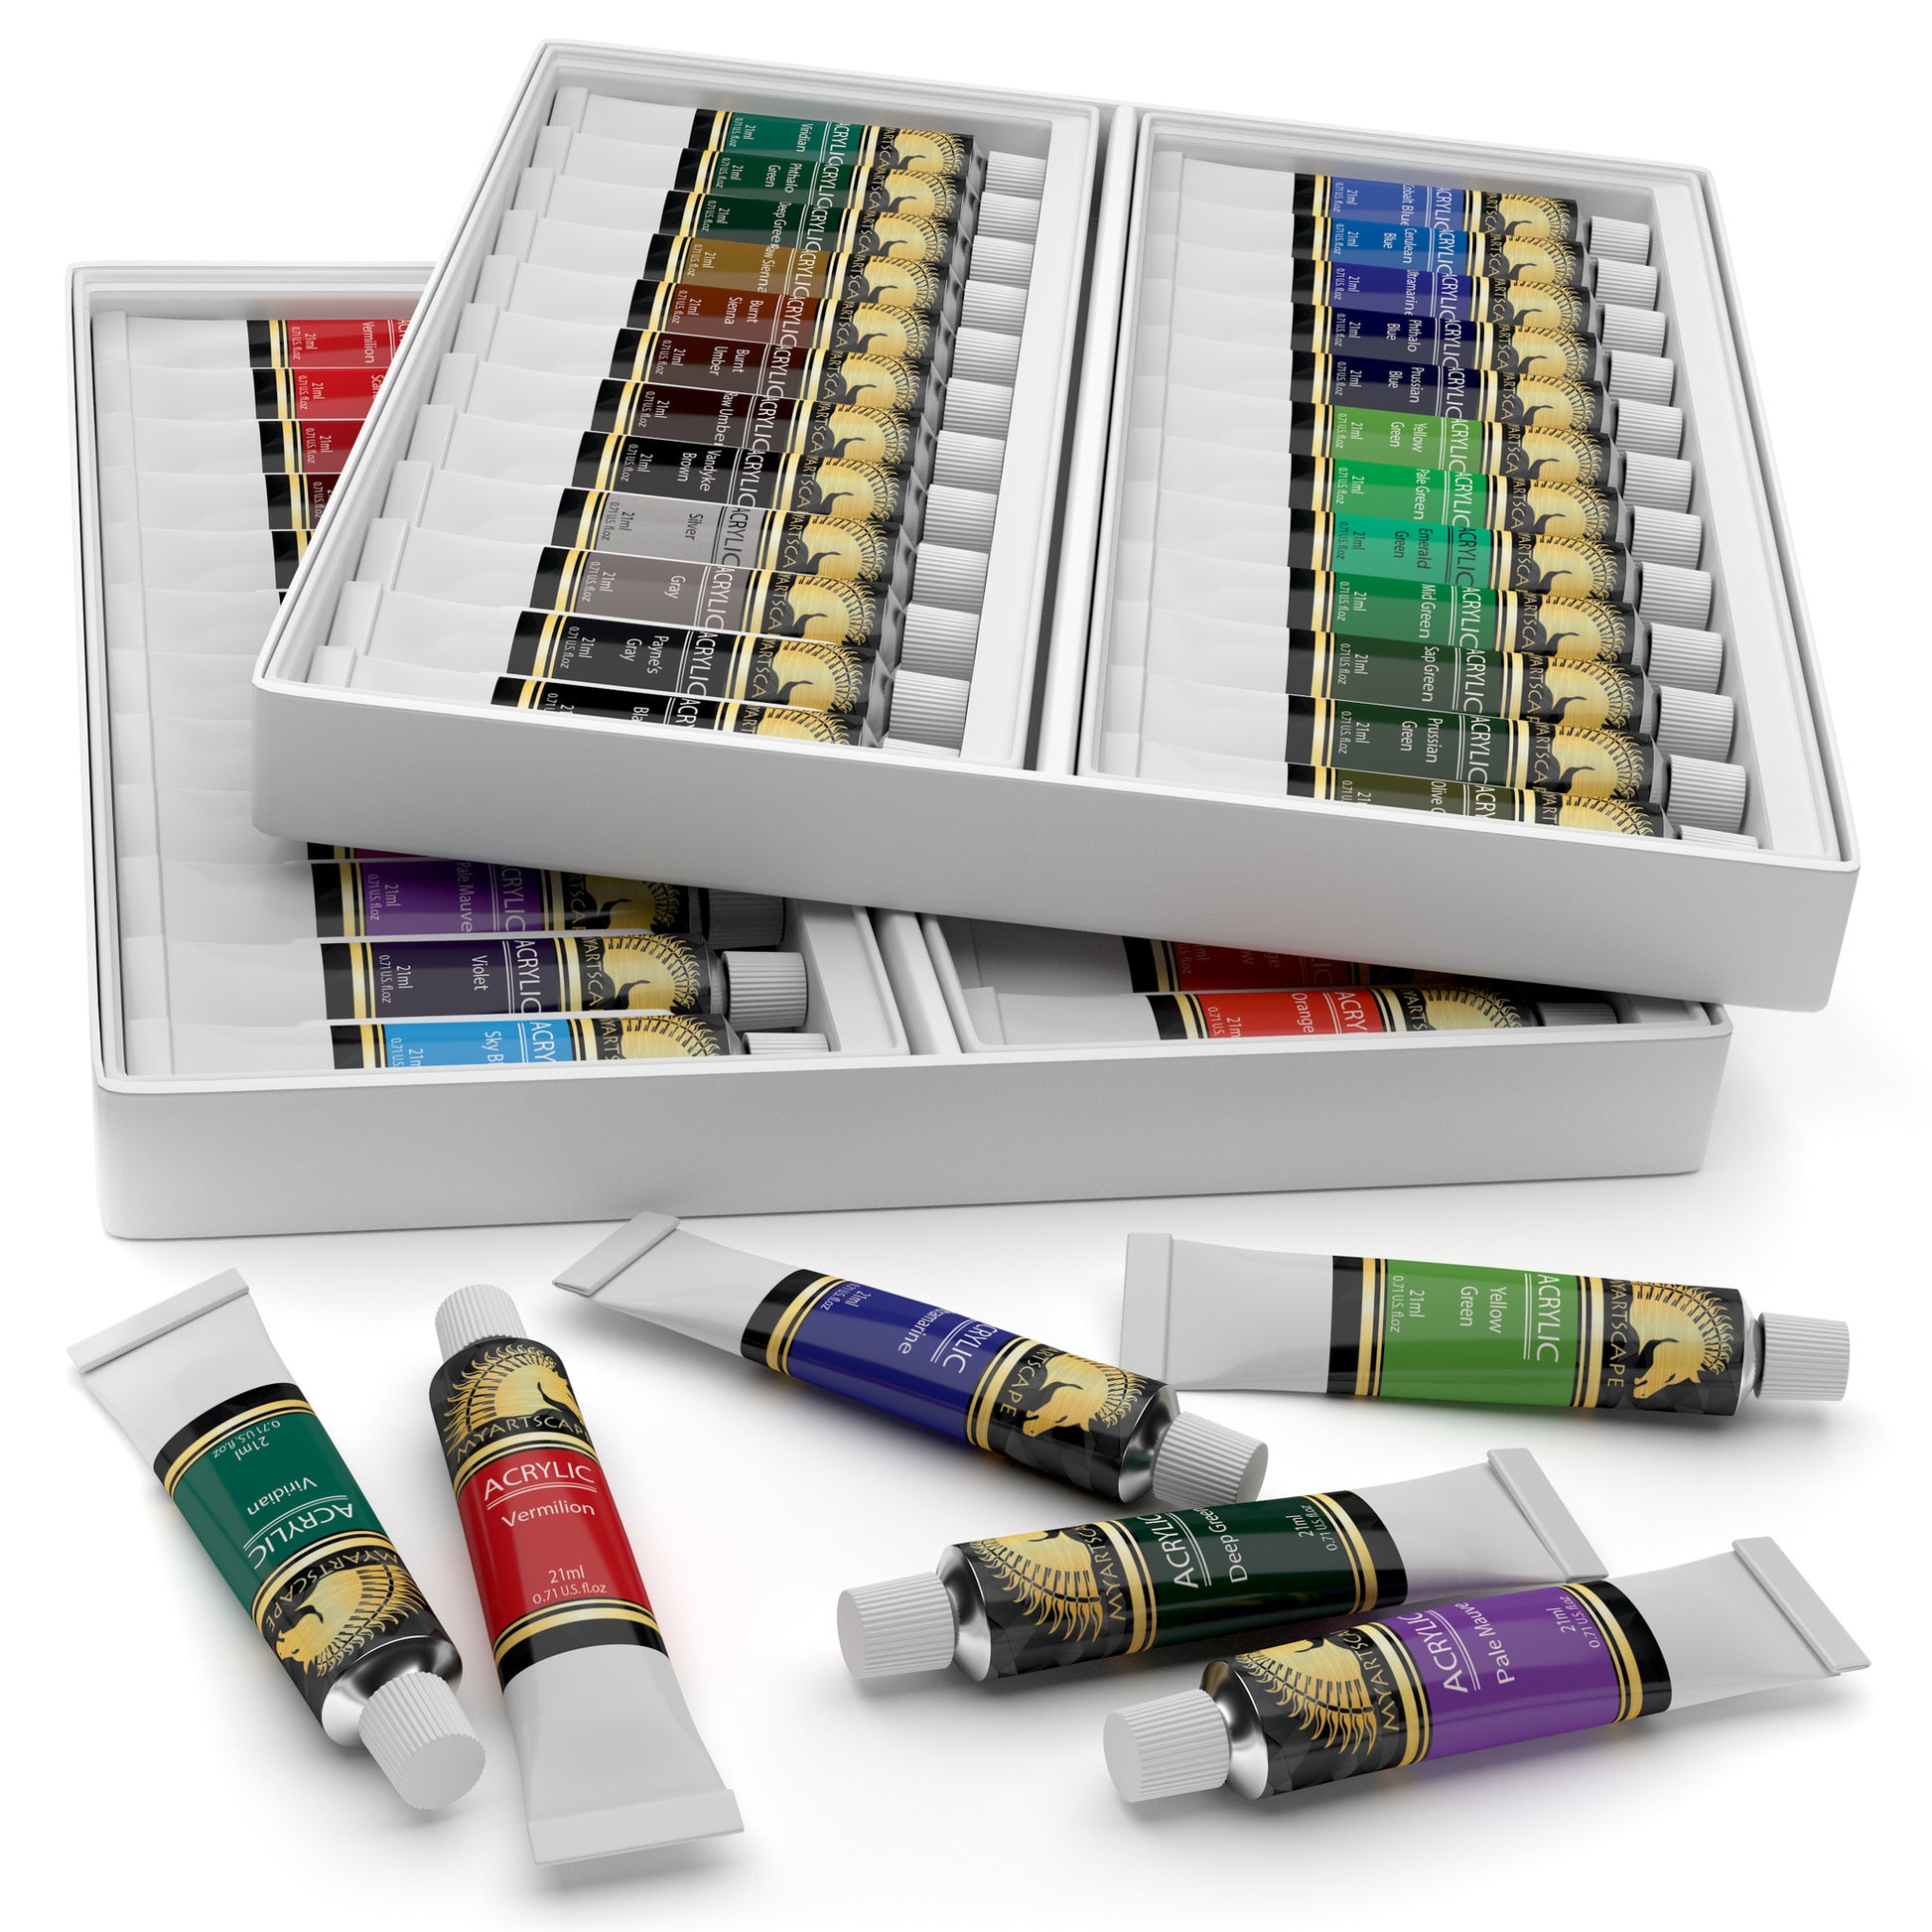 Artist's Supplies for Painting in Acrylics: An Explanation of the